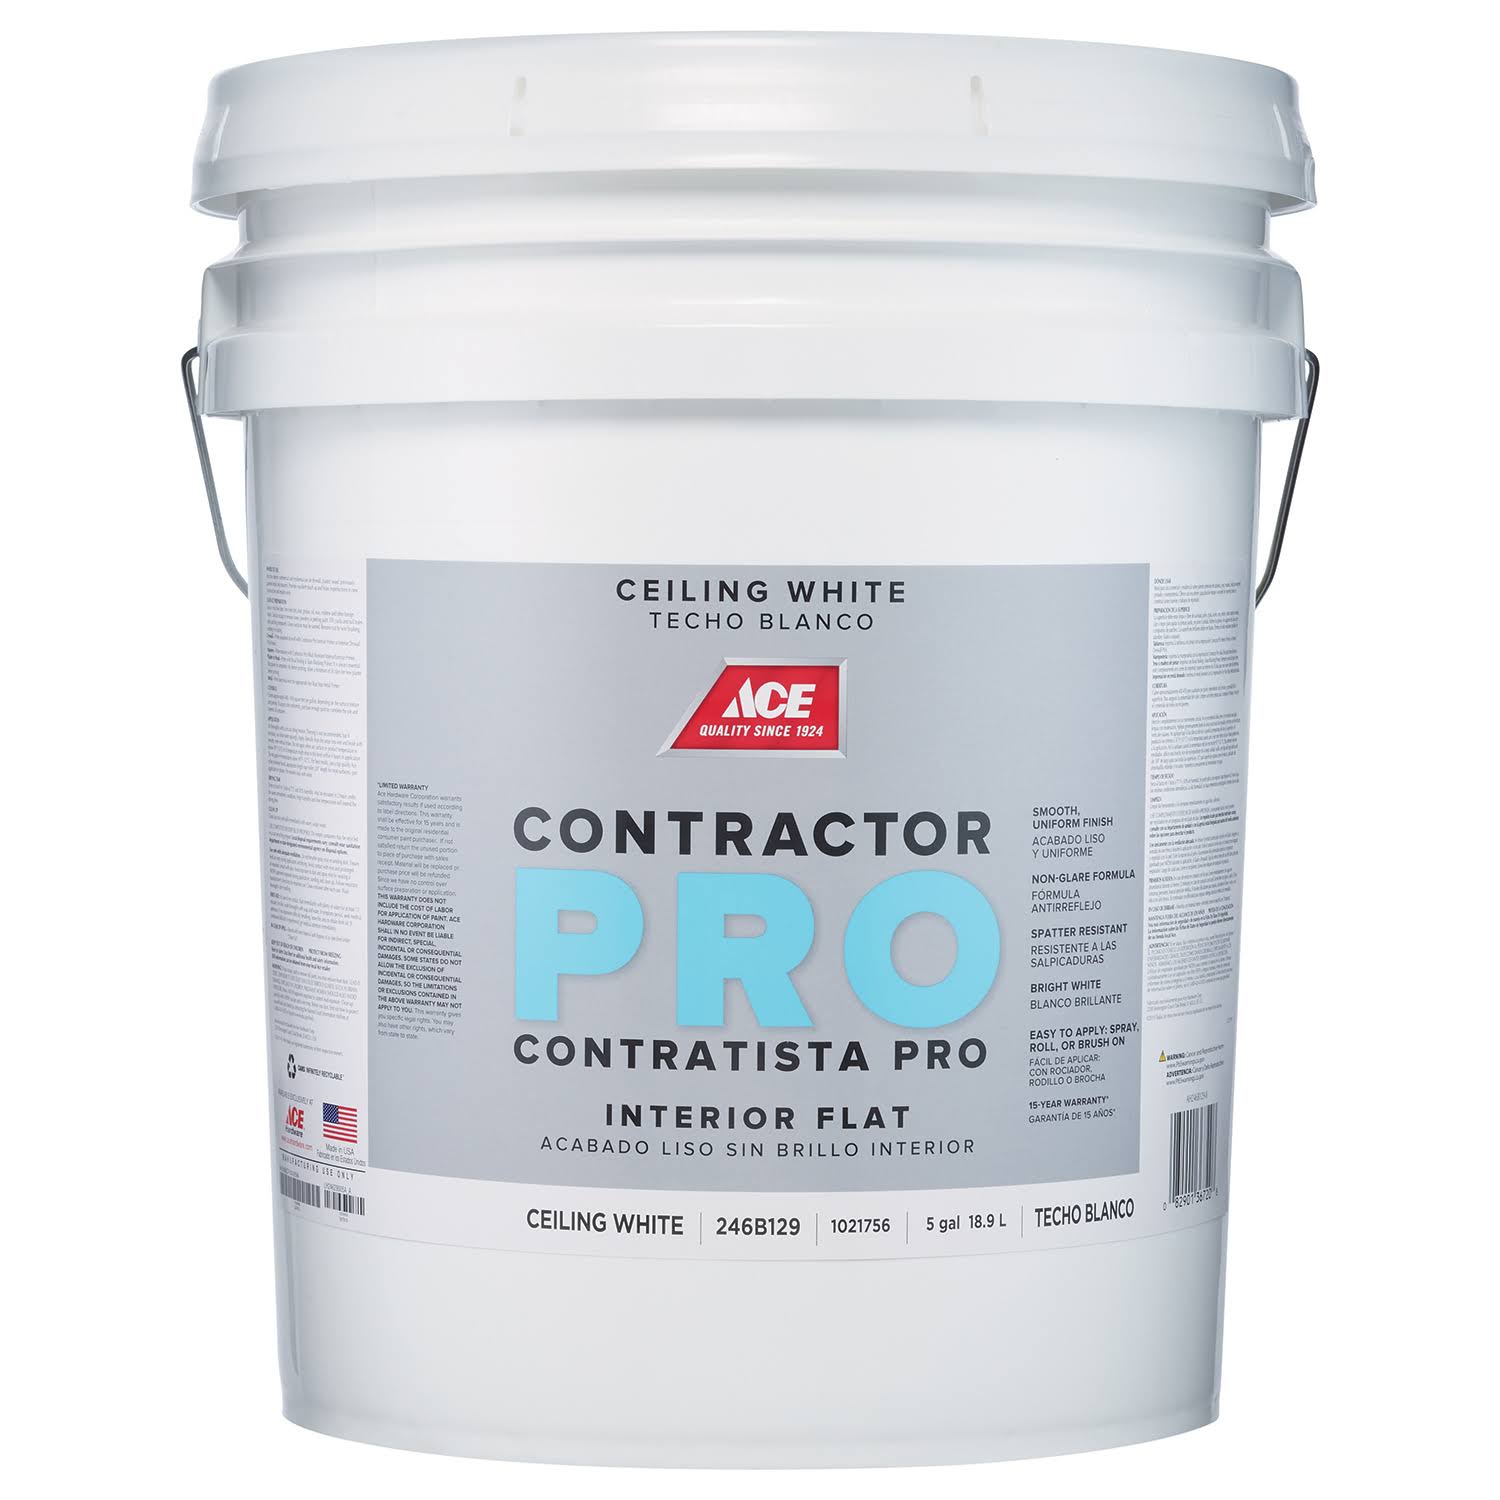 Ace Contractor Pro Flat Ceiling White Paint Interior 5 Gal